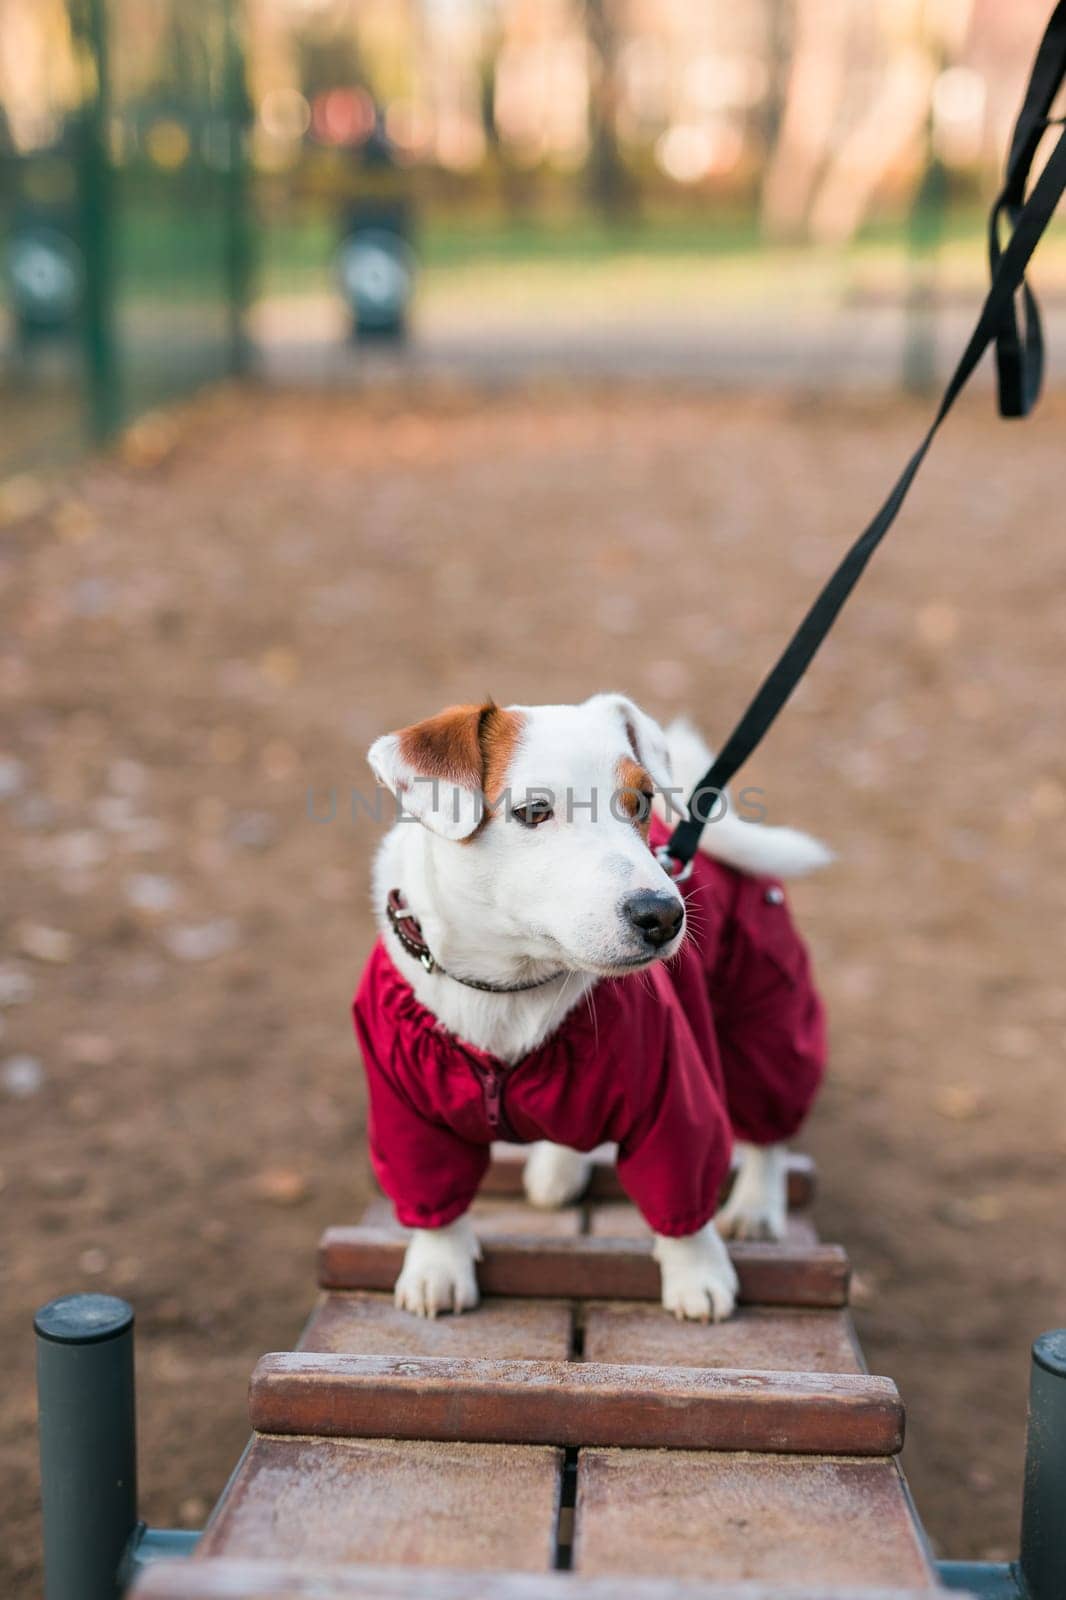 Jack russell terrier dog trainings outdoors in city park zone dog walking area background - pet lifestyle concept by Satura86